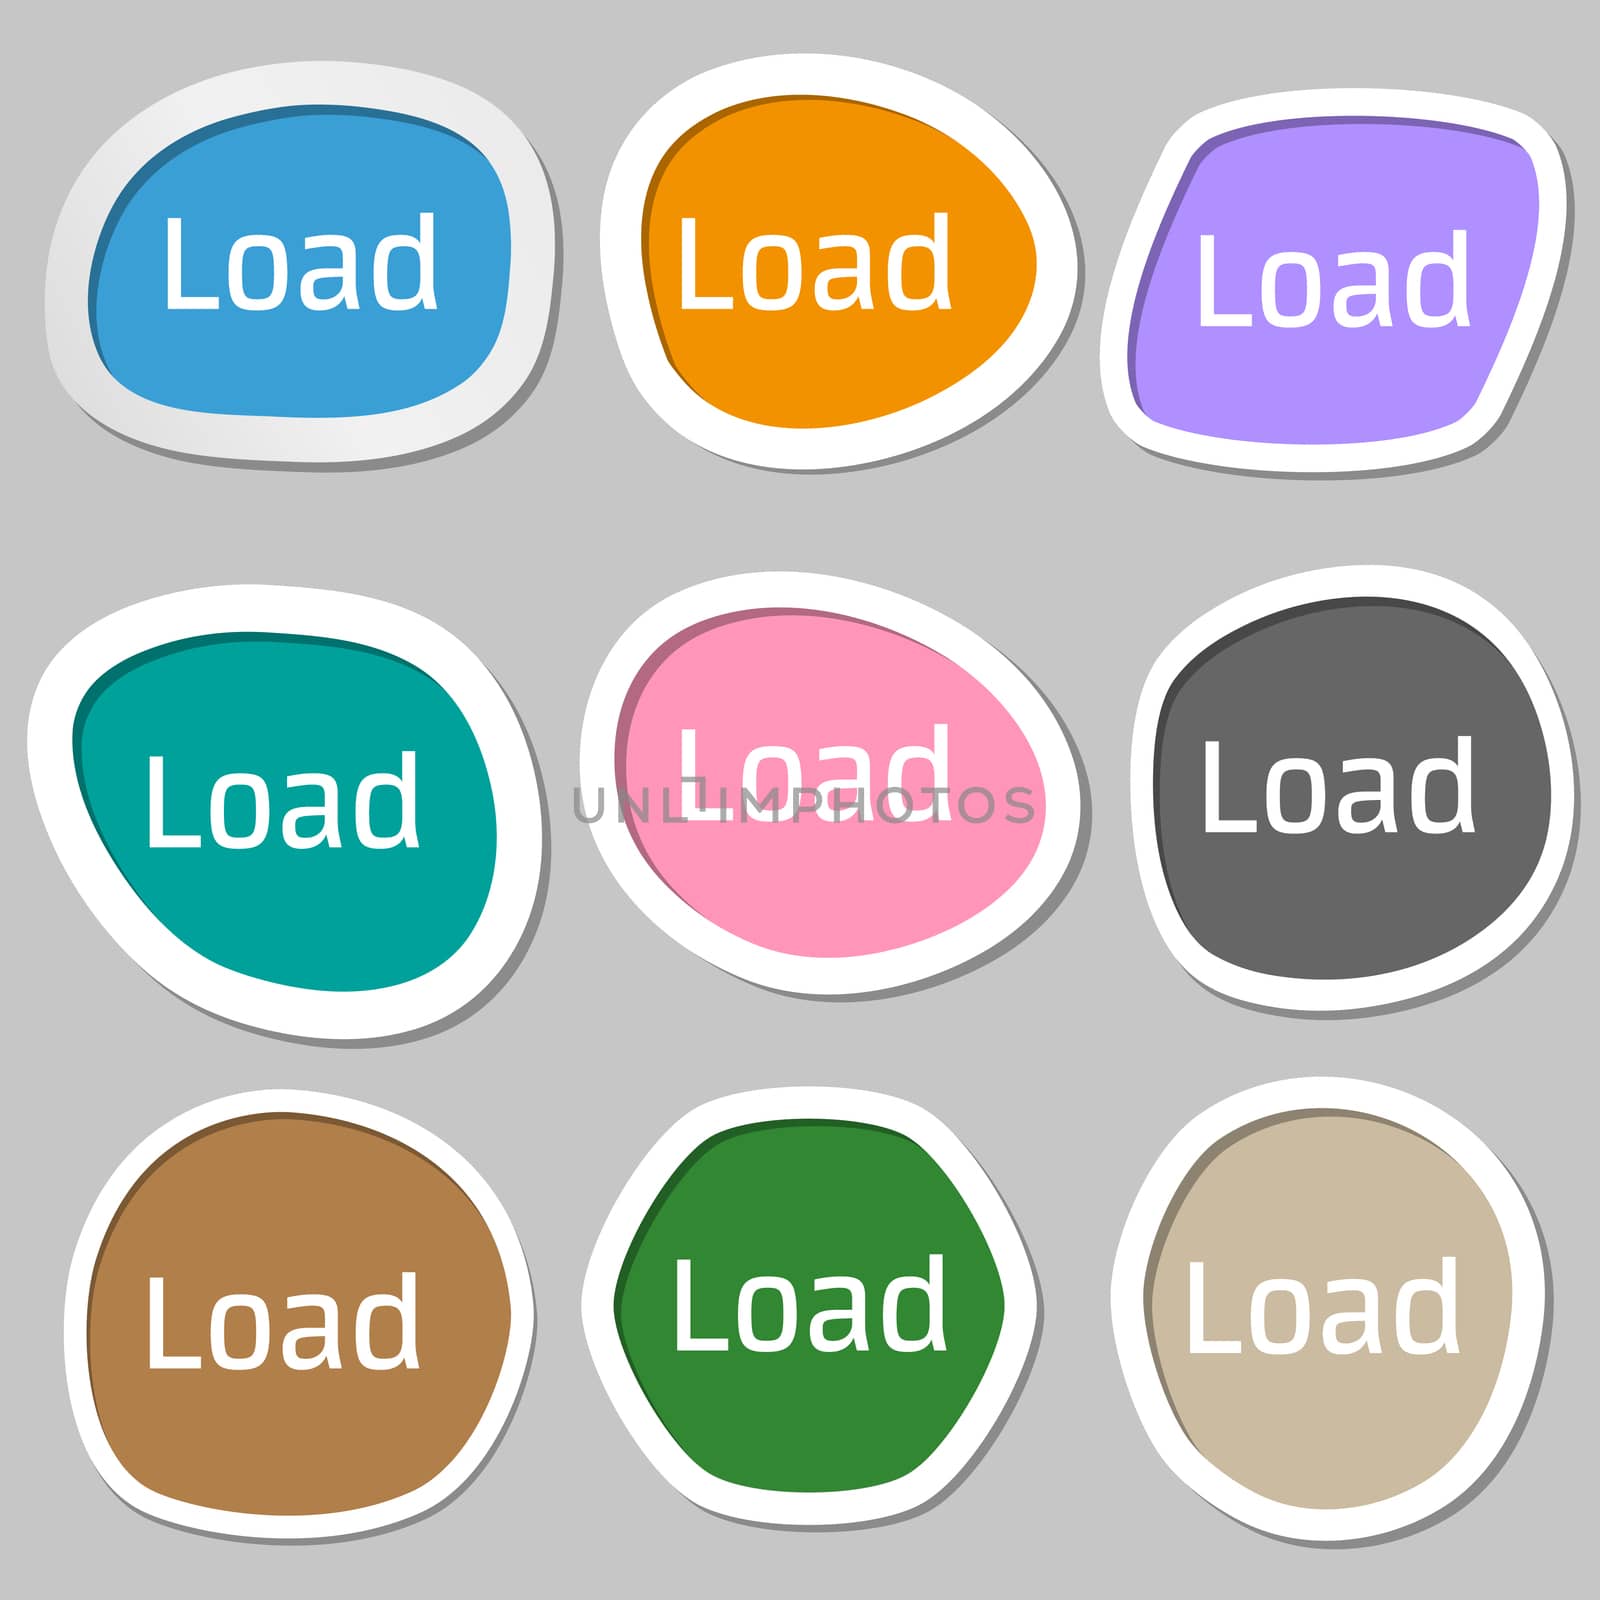 Download now icon. Load symbol. Multicolored paper stickers. illustration